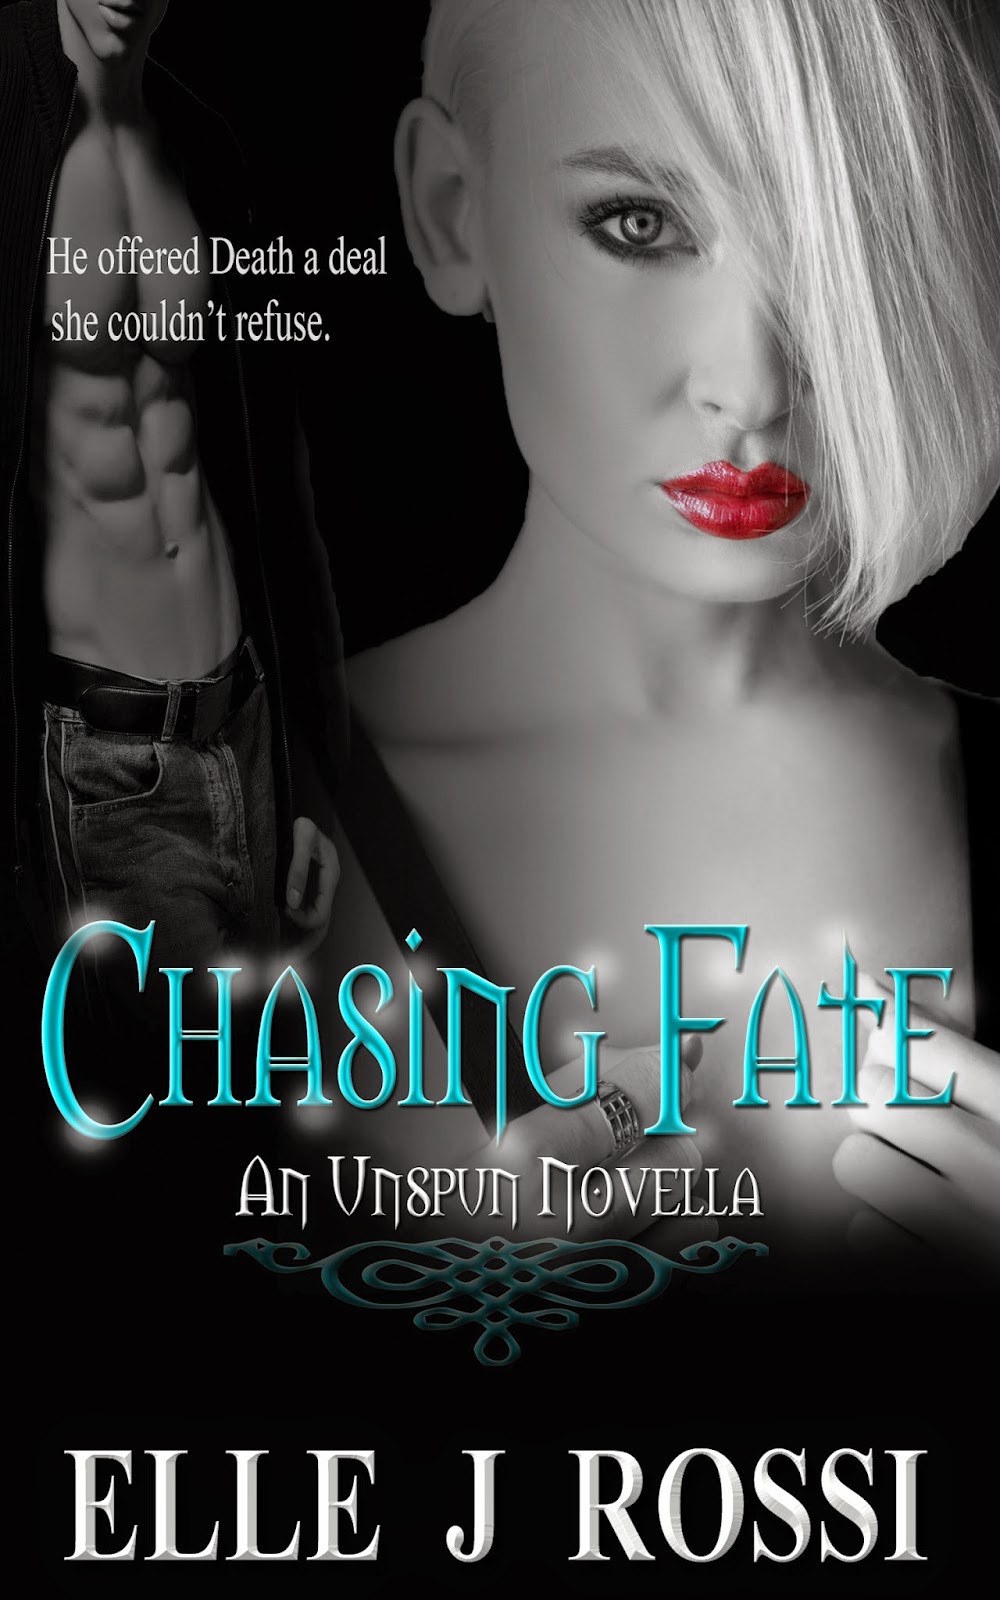 https://www.goodreads.com/book/show/13516522-chasing-fate